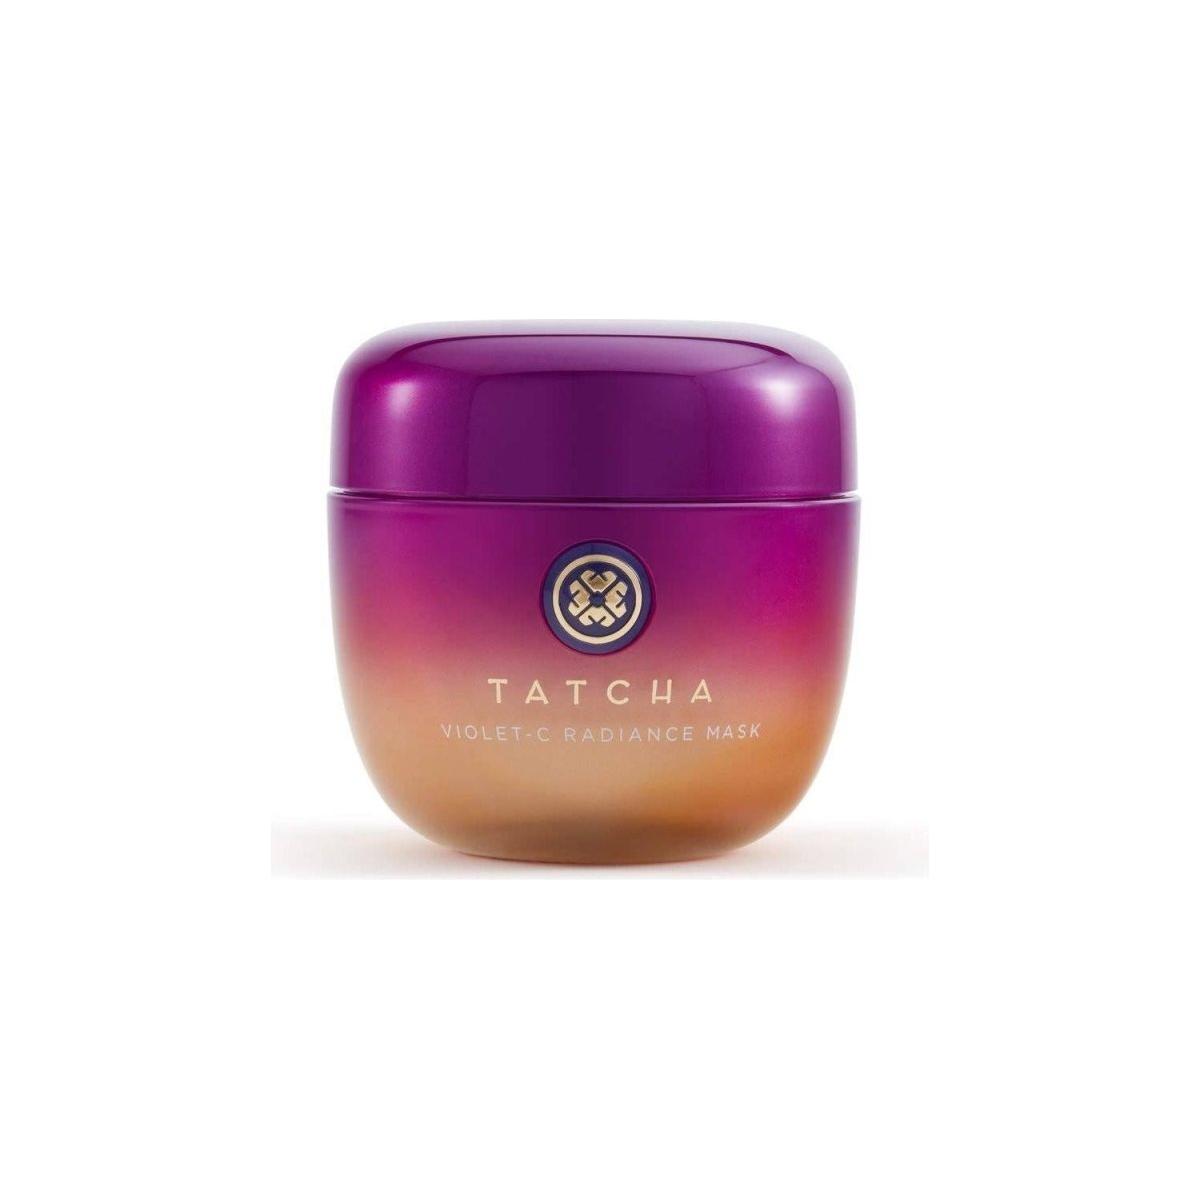 Tatcha the Violet-C Radiance Mask: Creamy Firming Mask with Vitamin C for Soft, Glowing Skin (50 Ml / 1.7 Oz) - Glam Global UK